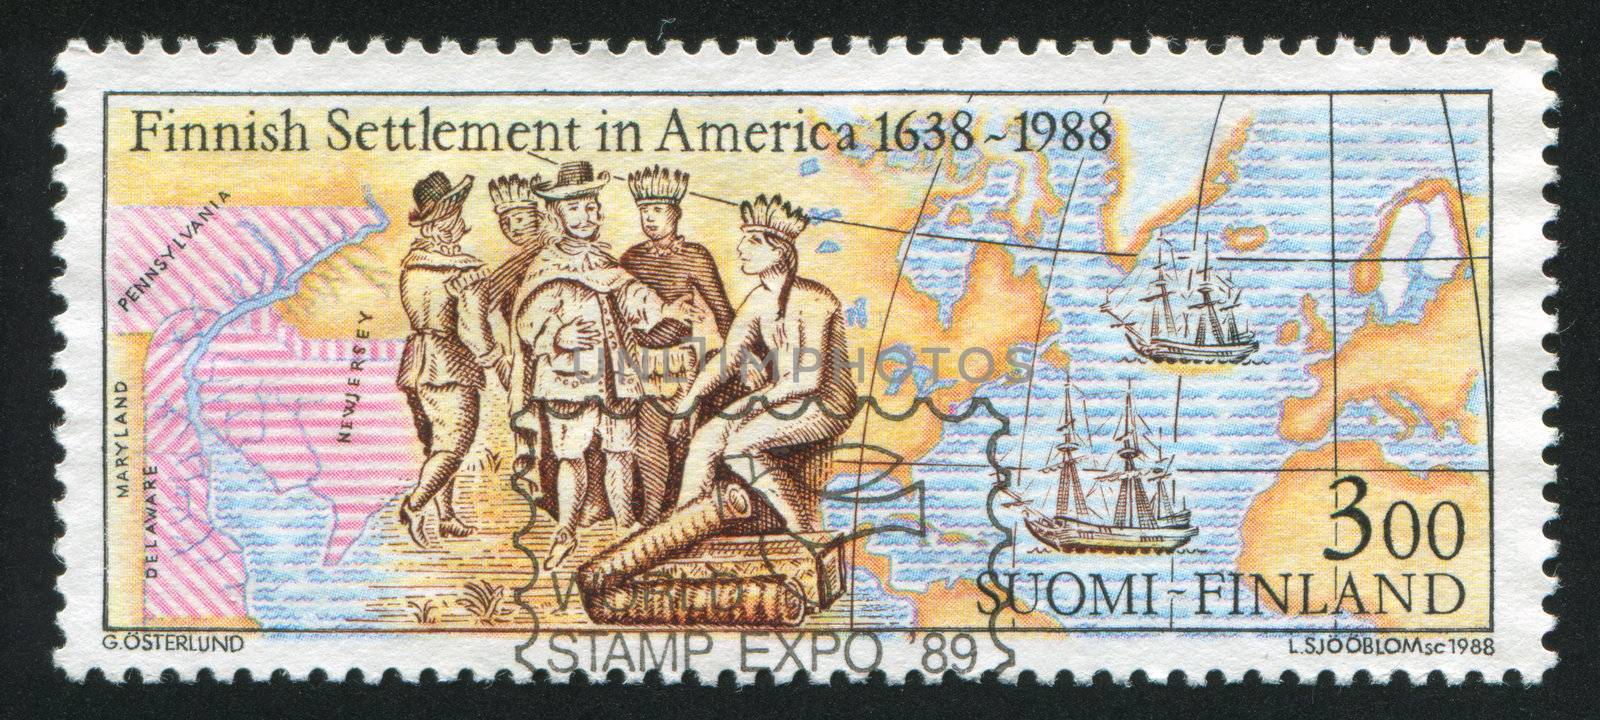 FINLAND - CIRCA 1988: stamp printed by Finland, shows Settlement of New Sweden in America, circa 1988